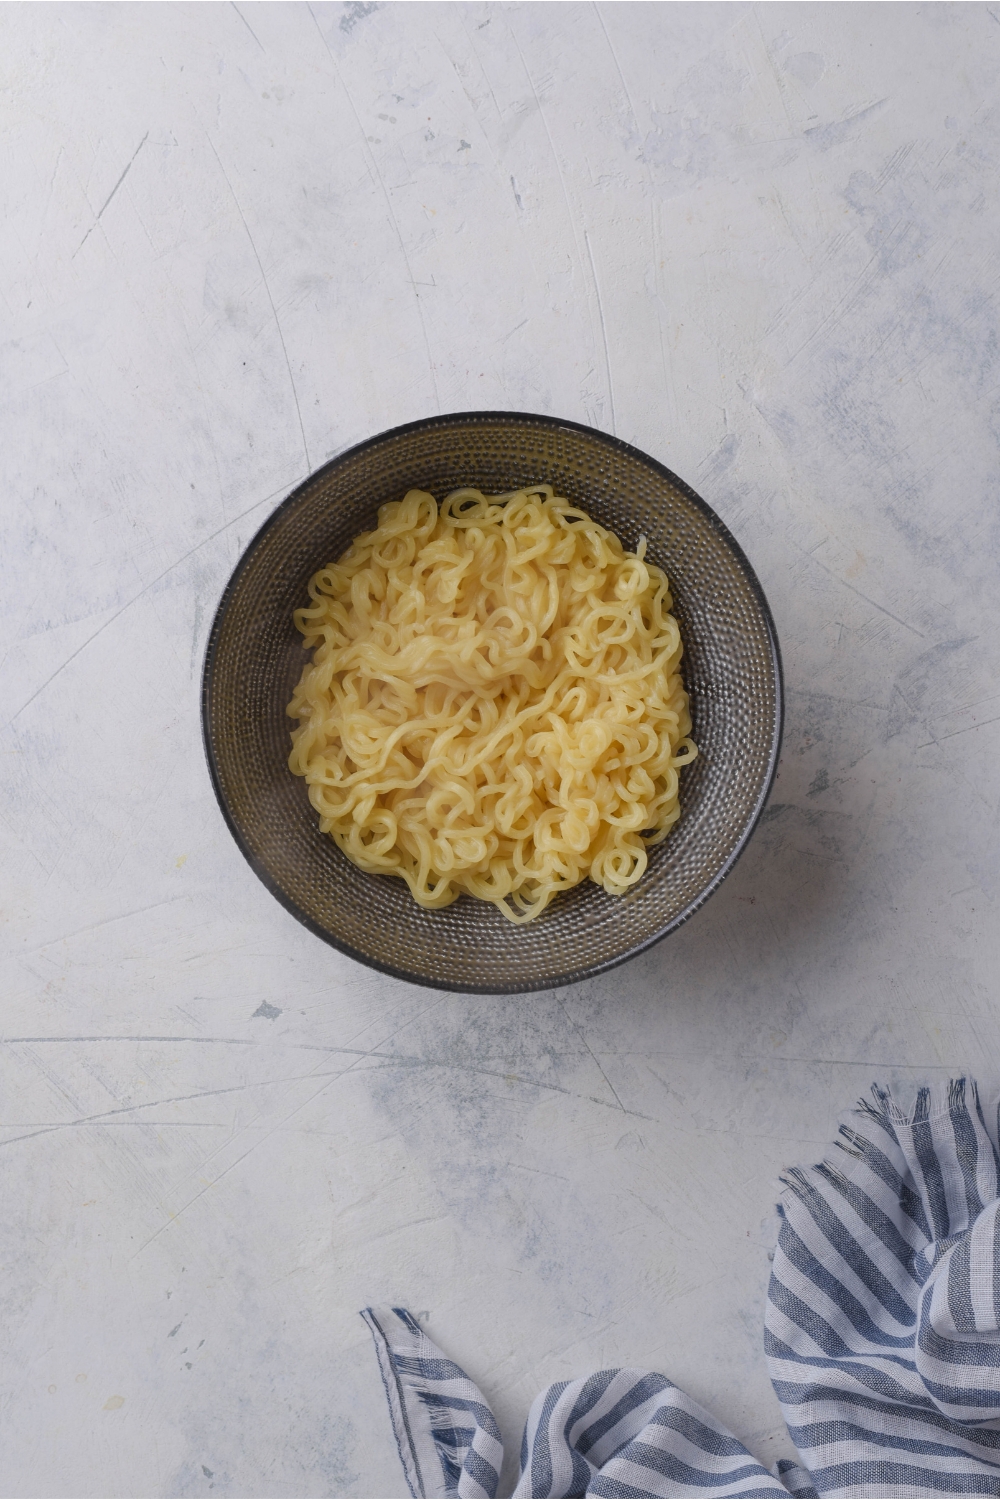 A black bowl filled with cooked ramen noodles.